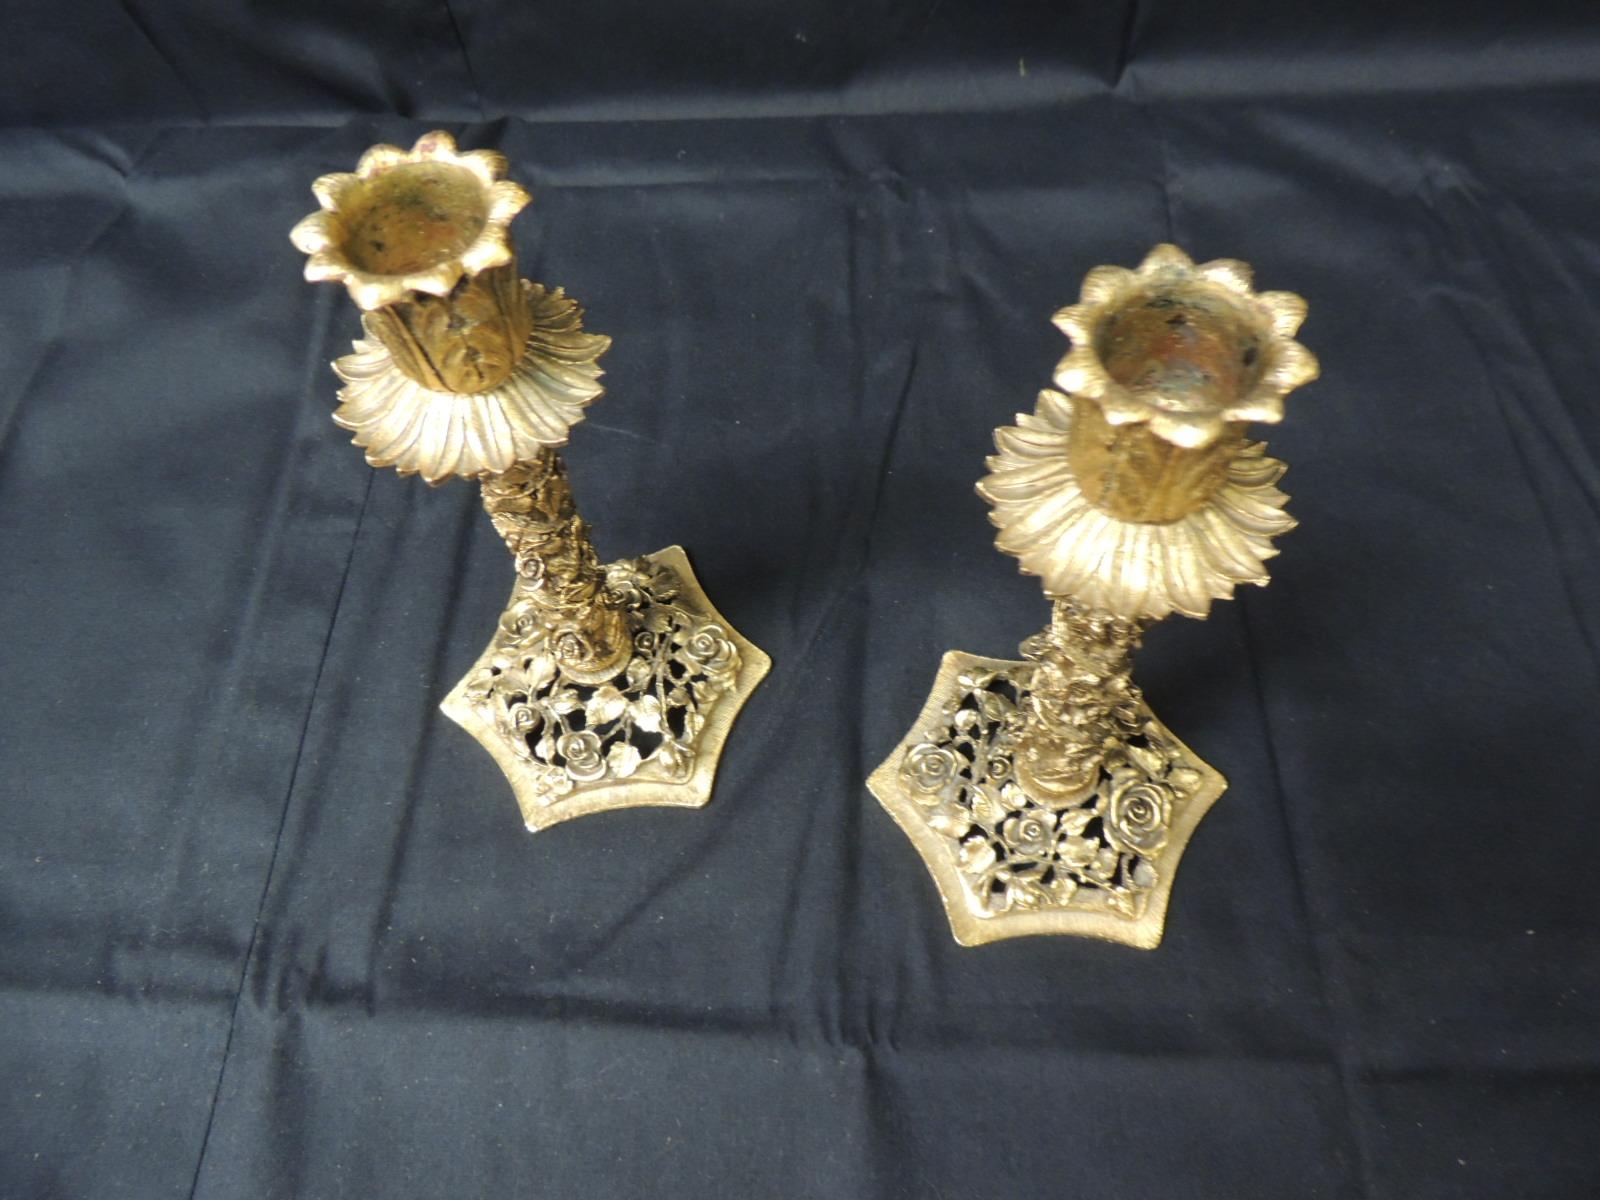 Vintage pair of candlesticks with elaborate filigree of roses and flowers.
(heavy) by Matson
Size: 4 x 4 x 7 H.